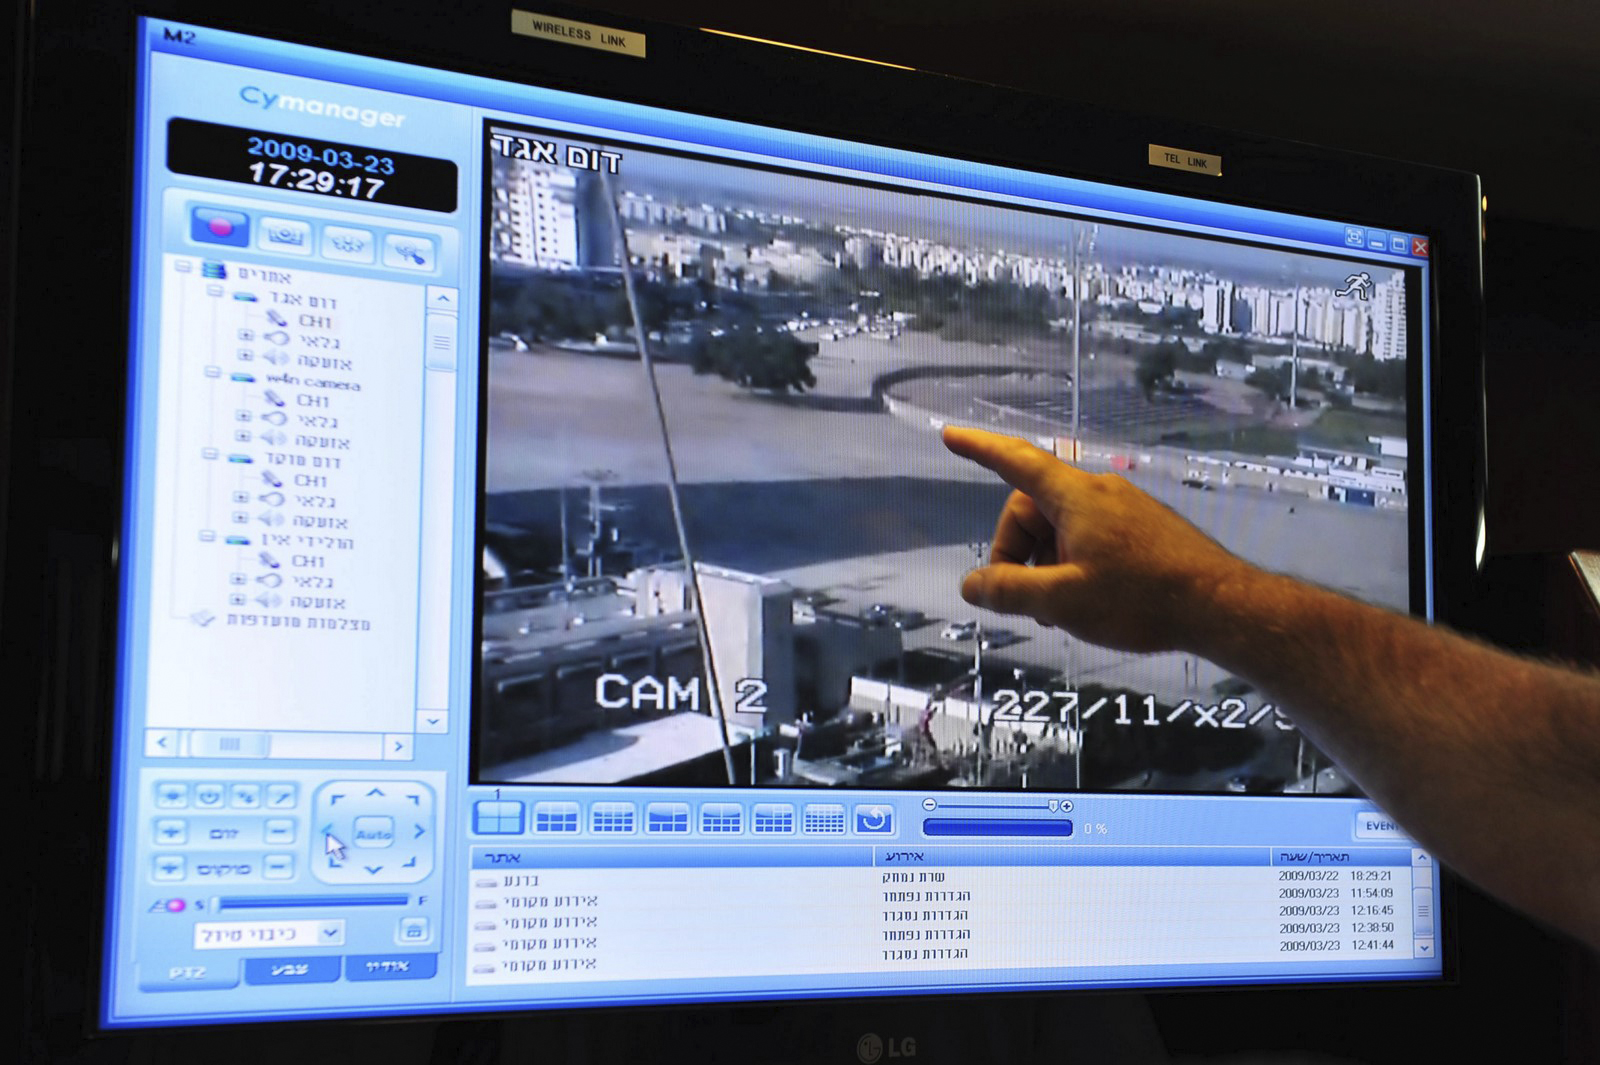 ASHKELON, ISR - JAN 18:CCTV security system with multiple camera on Jan 18 2009.According to a research, the average citizen is caught about 300 times a day on a CCTV camera.